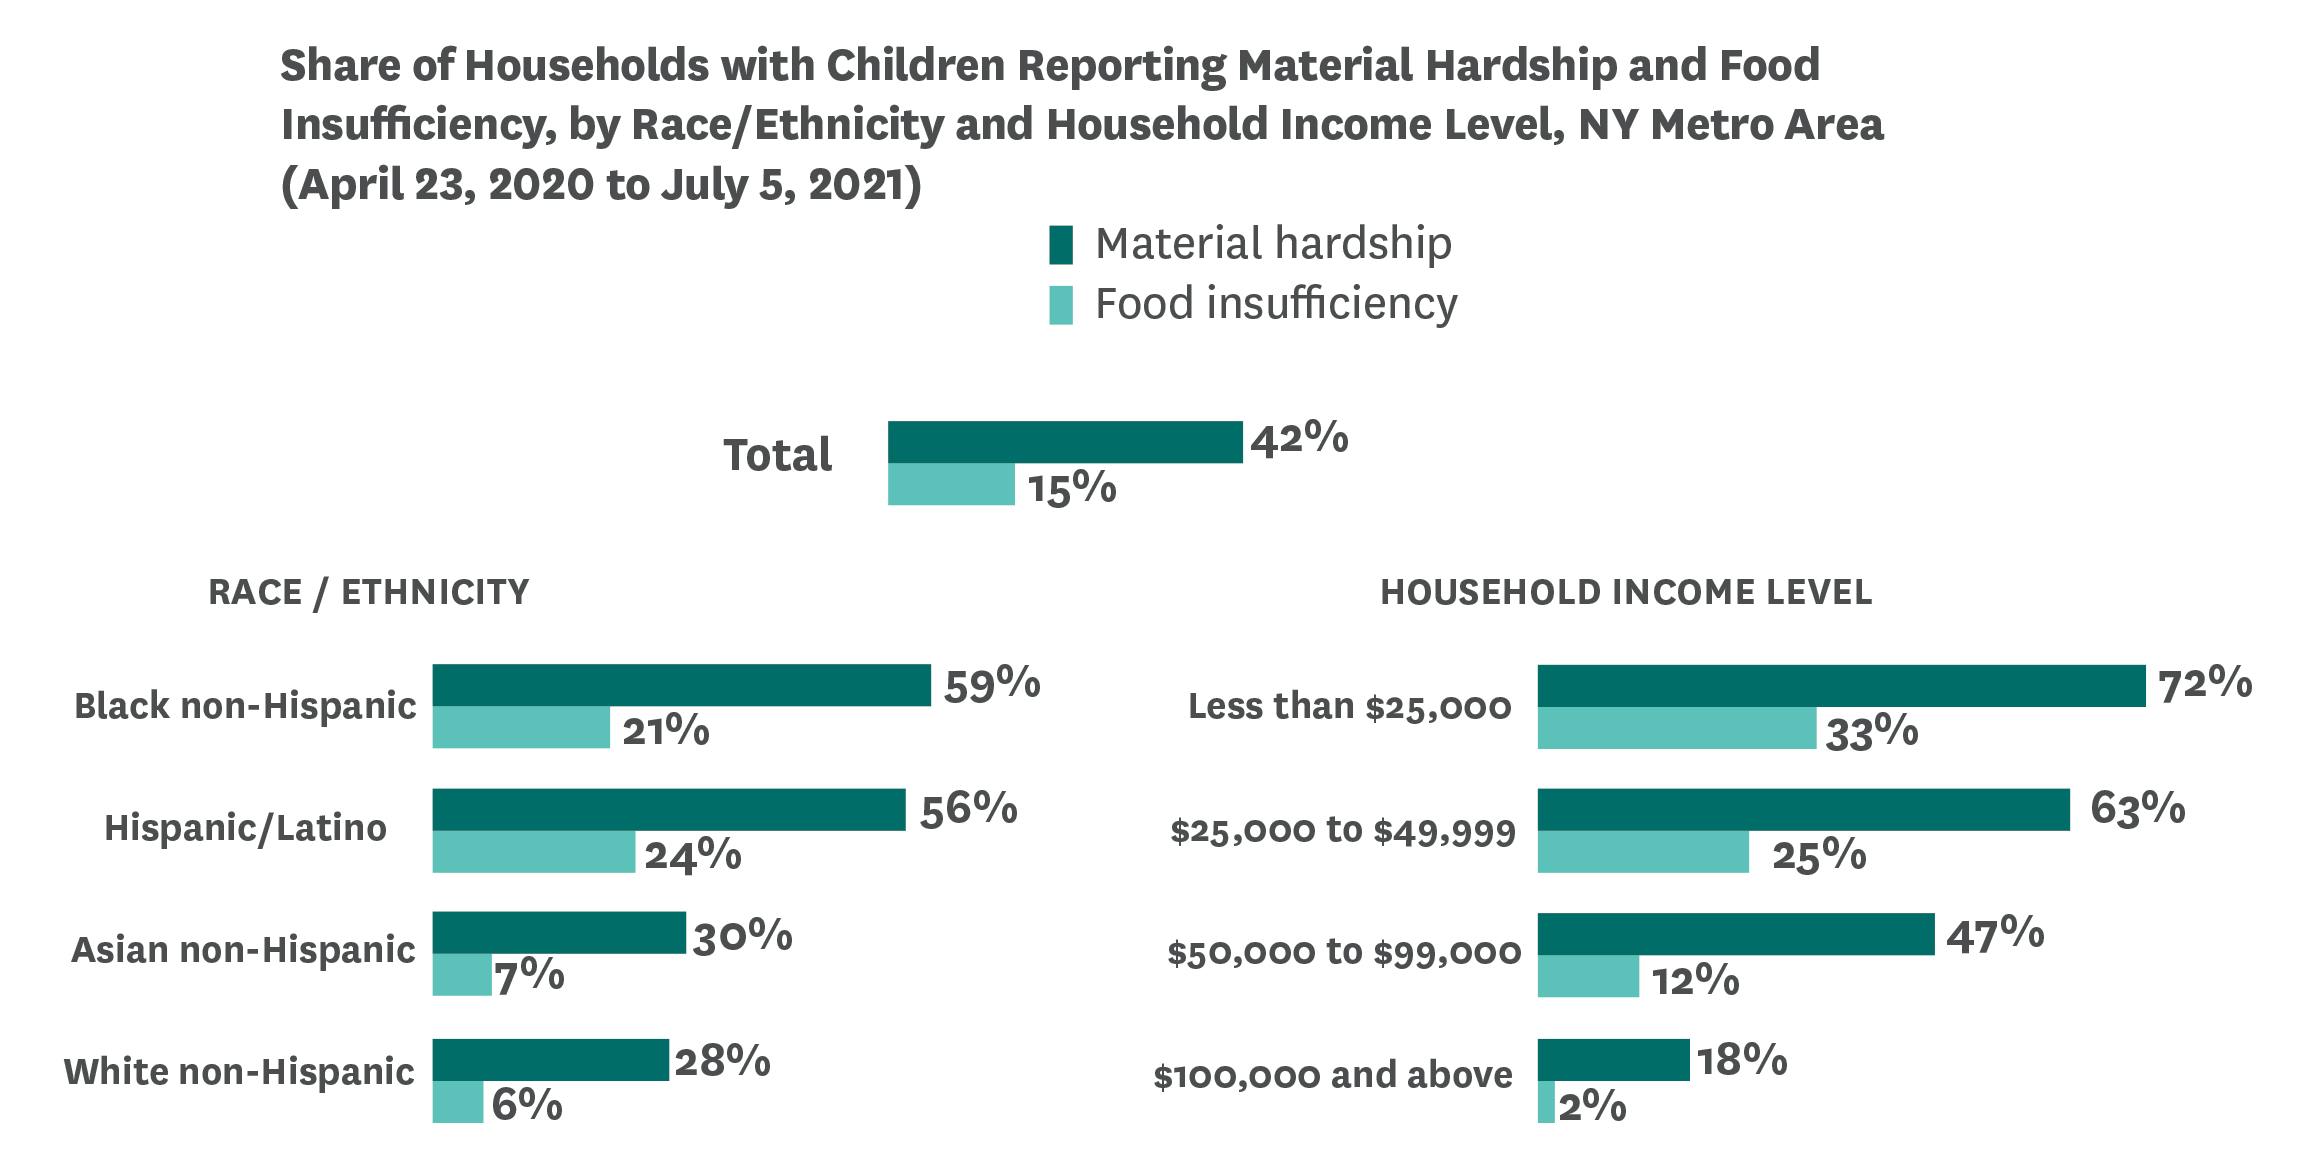 The heightened insecurities caused by the pandemic have reinforced inequities by race/ethnicity and socio-economic status. Families of color and those earning below $50,000 report significantly higher rates of material hardship and food insufficiency from 2020 to 2021.